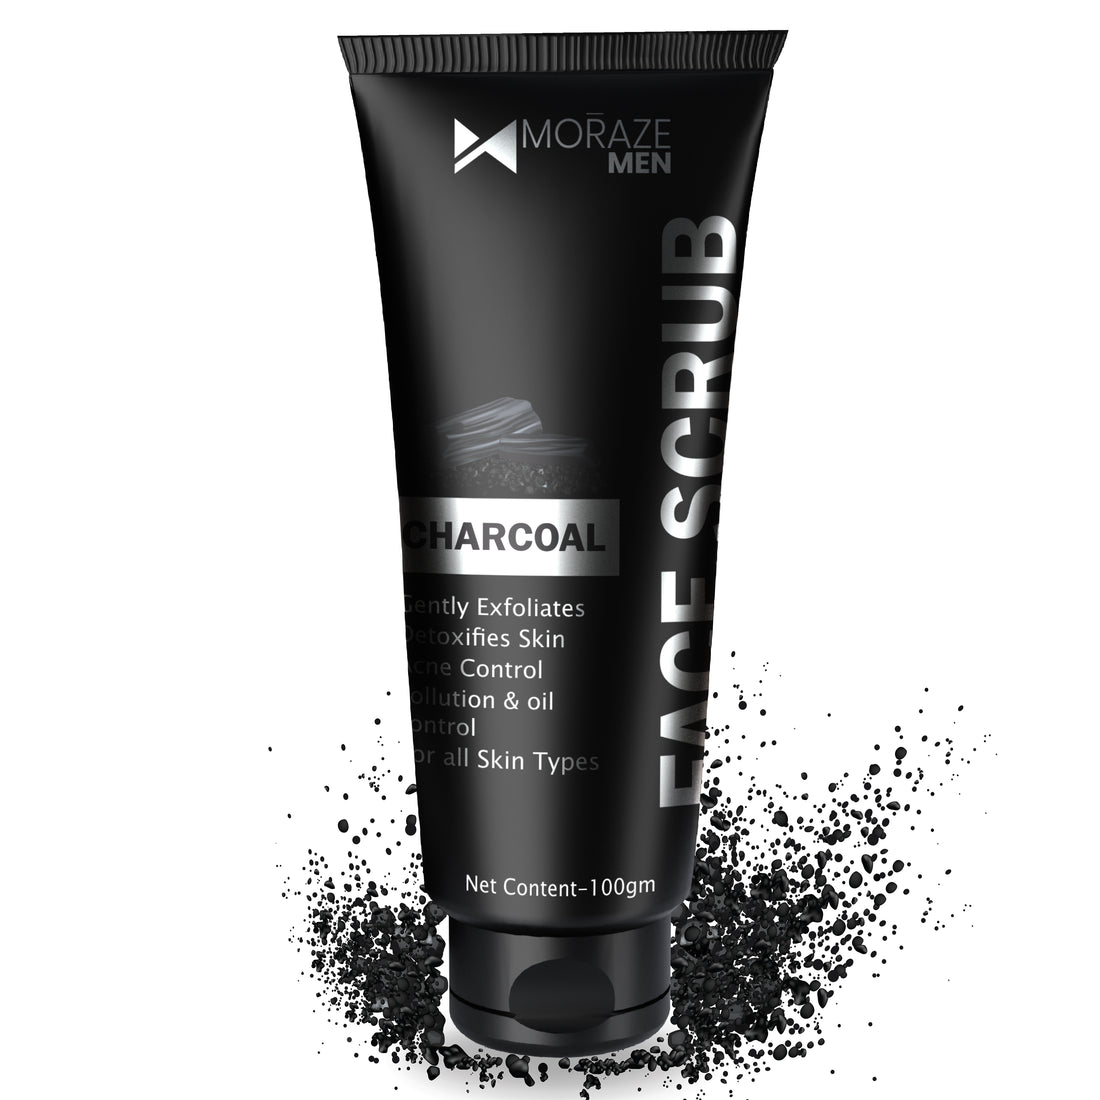 Men Activated Charcoal Face Scrub - 100ML